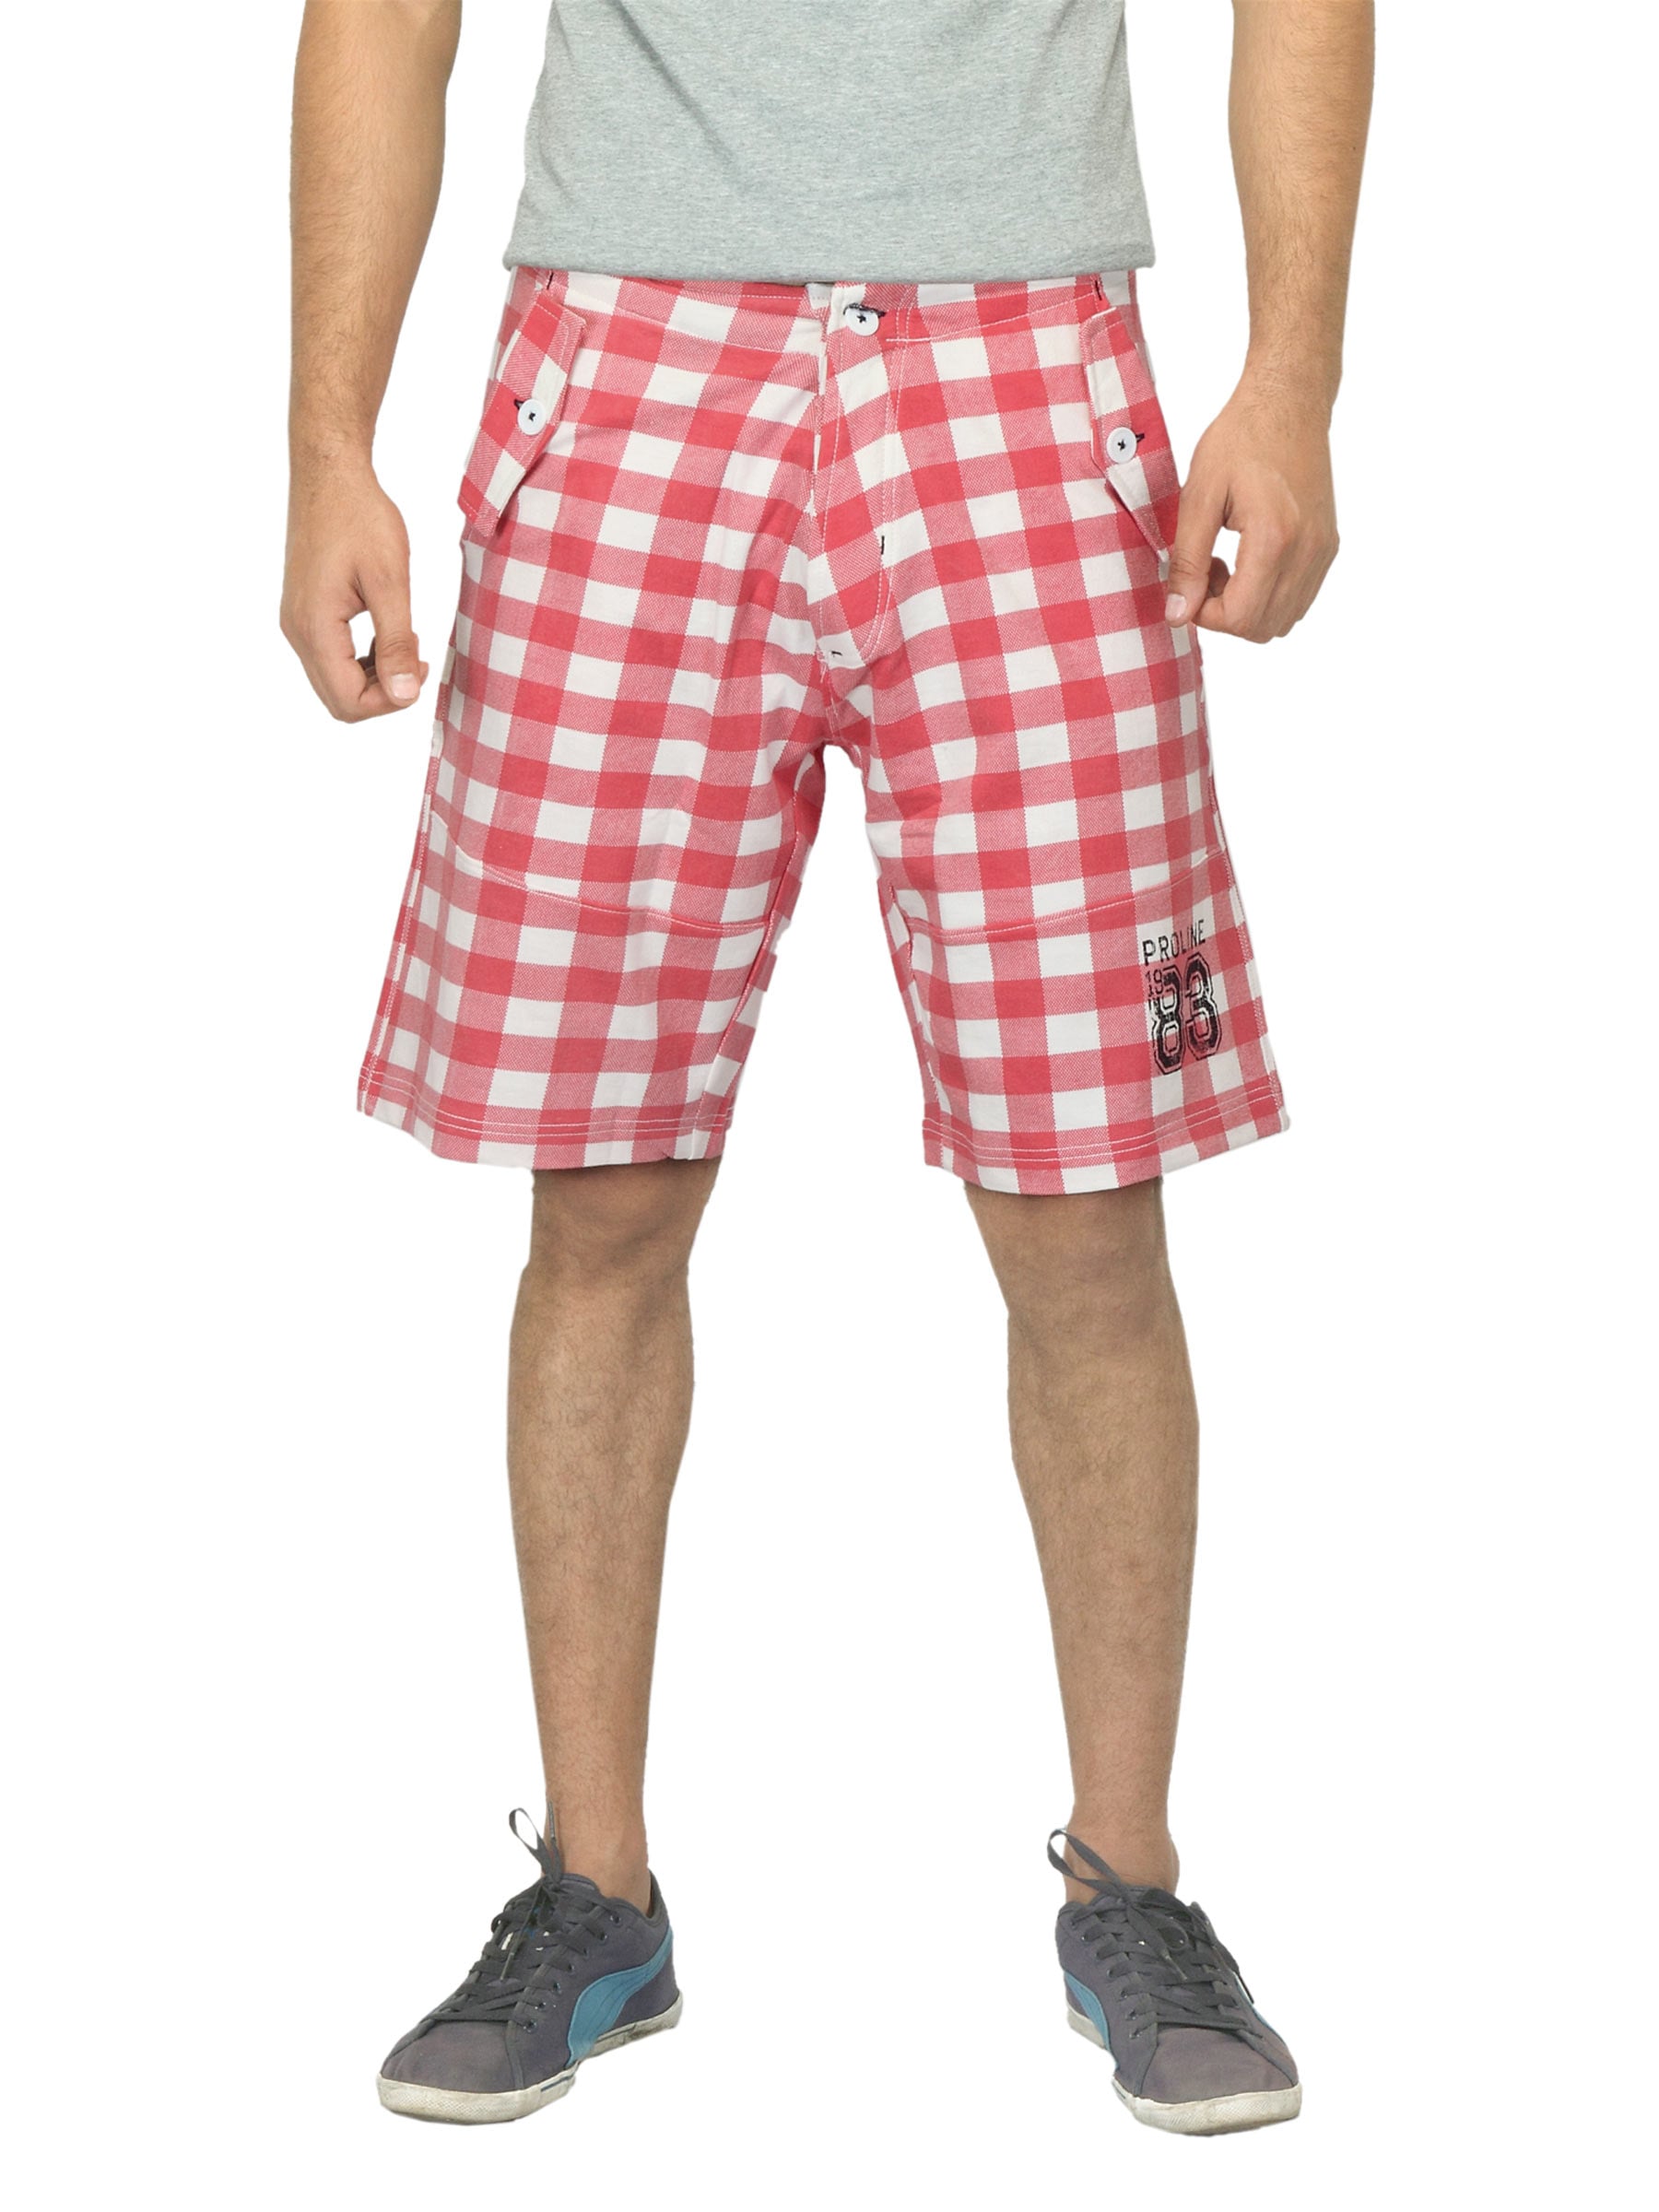 Proline Red & White Checked Shorts